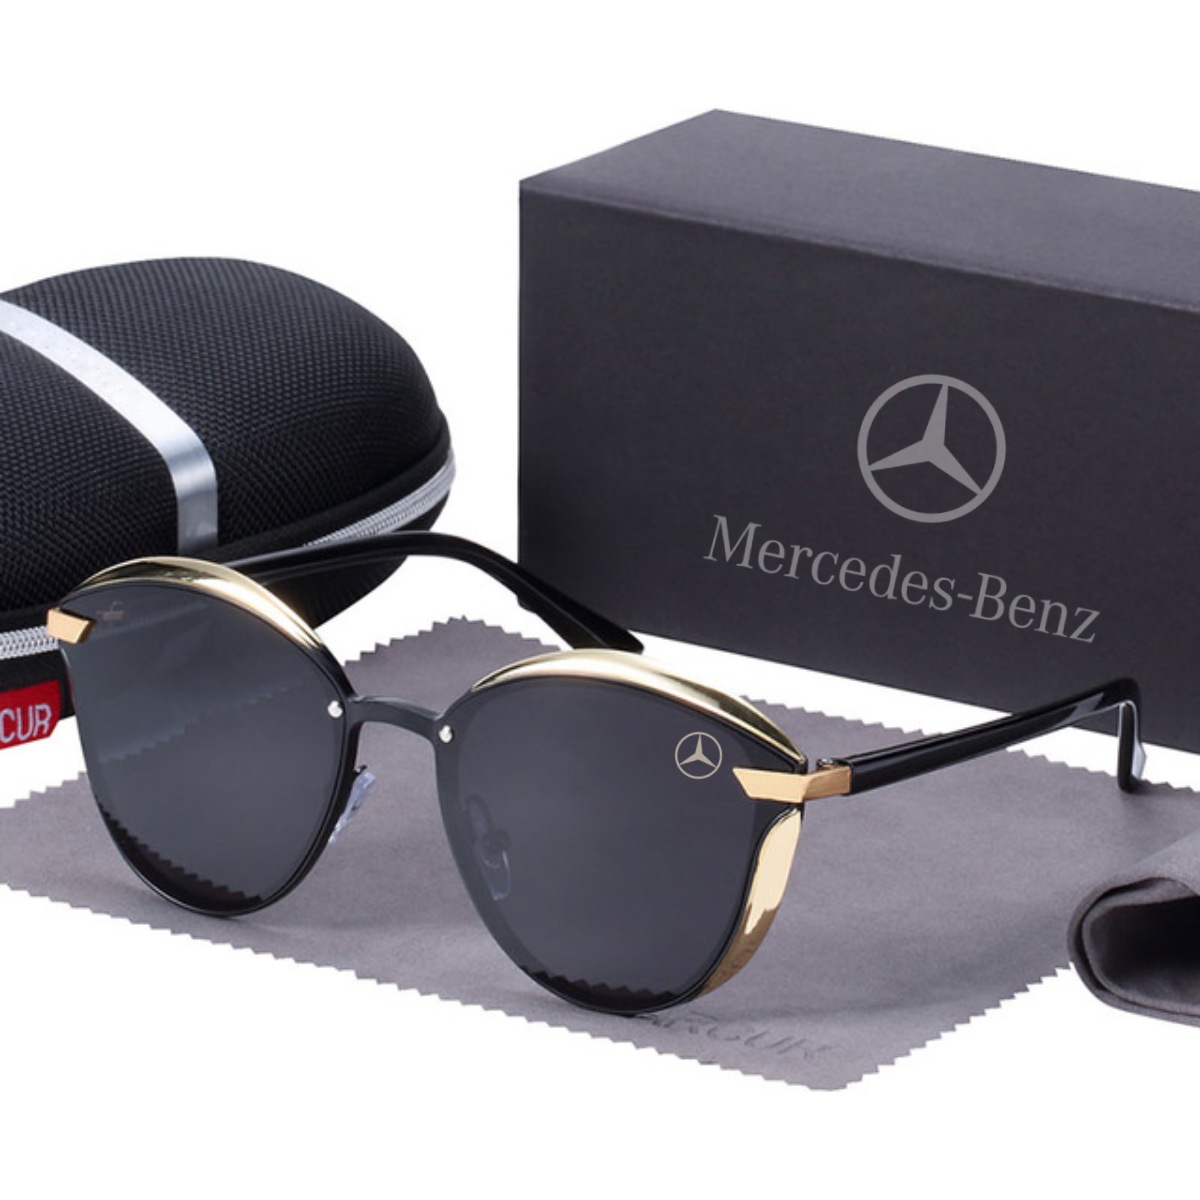 Mercedes-AMG has covered these German designer bags in burnouts